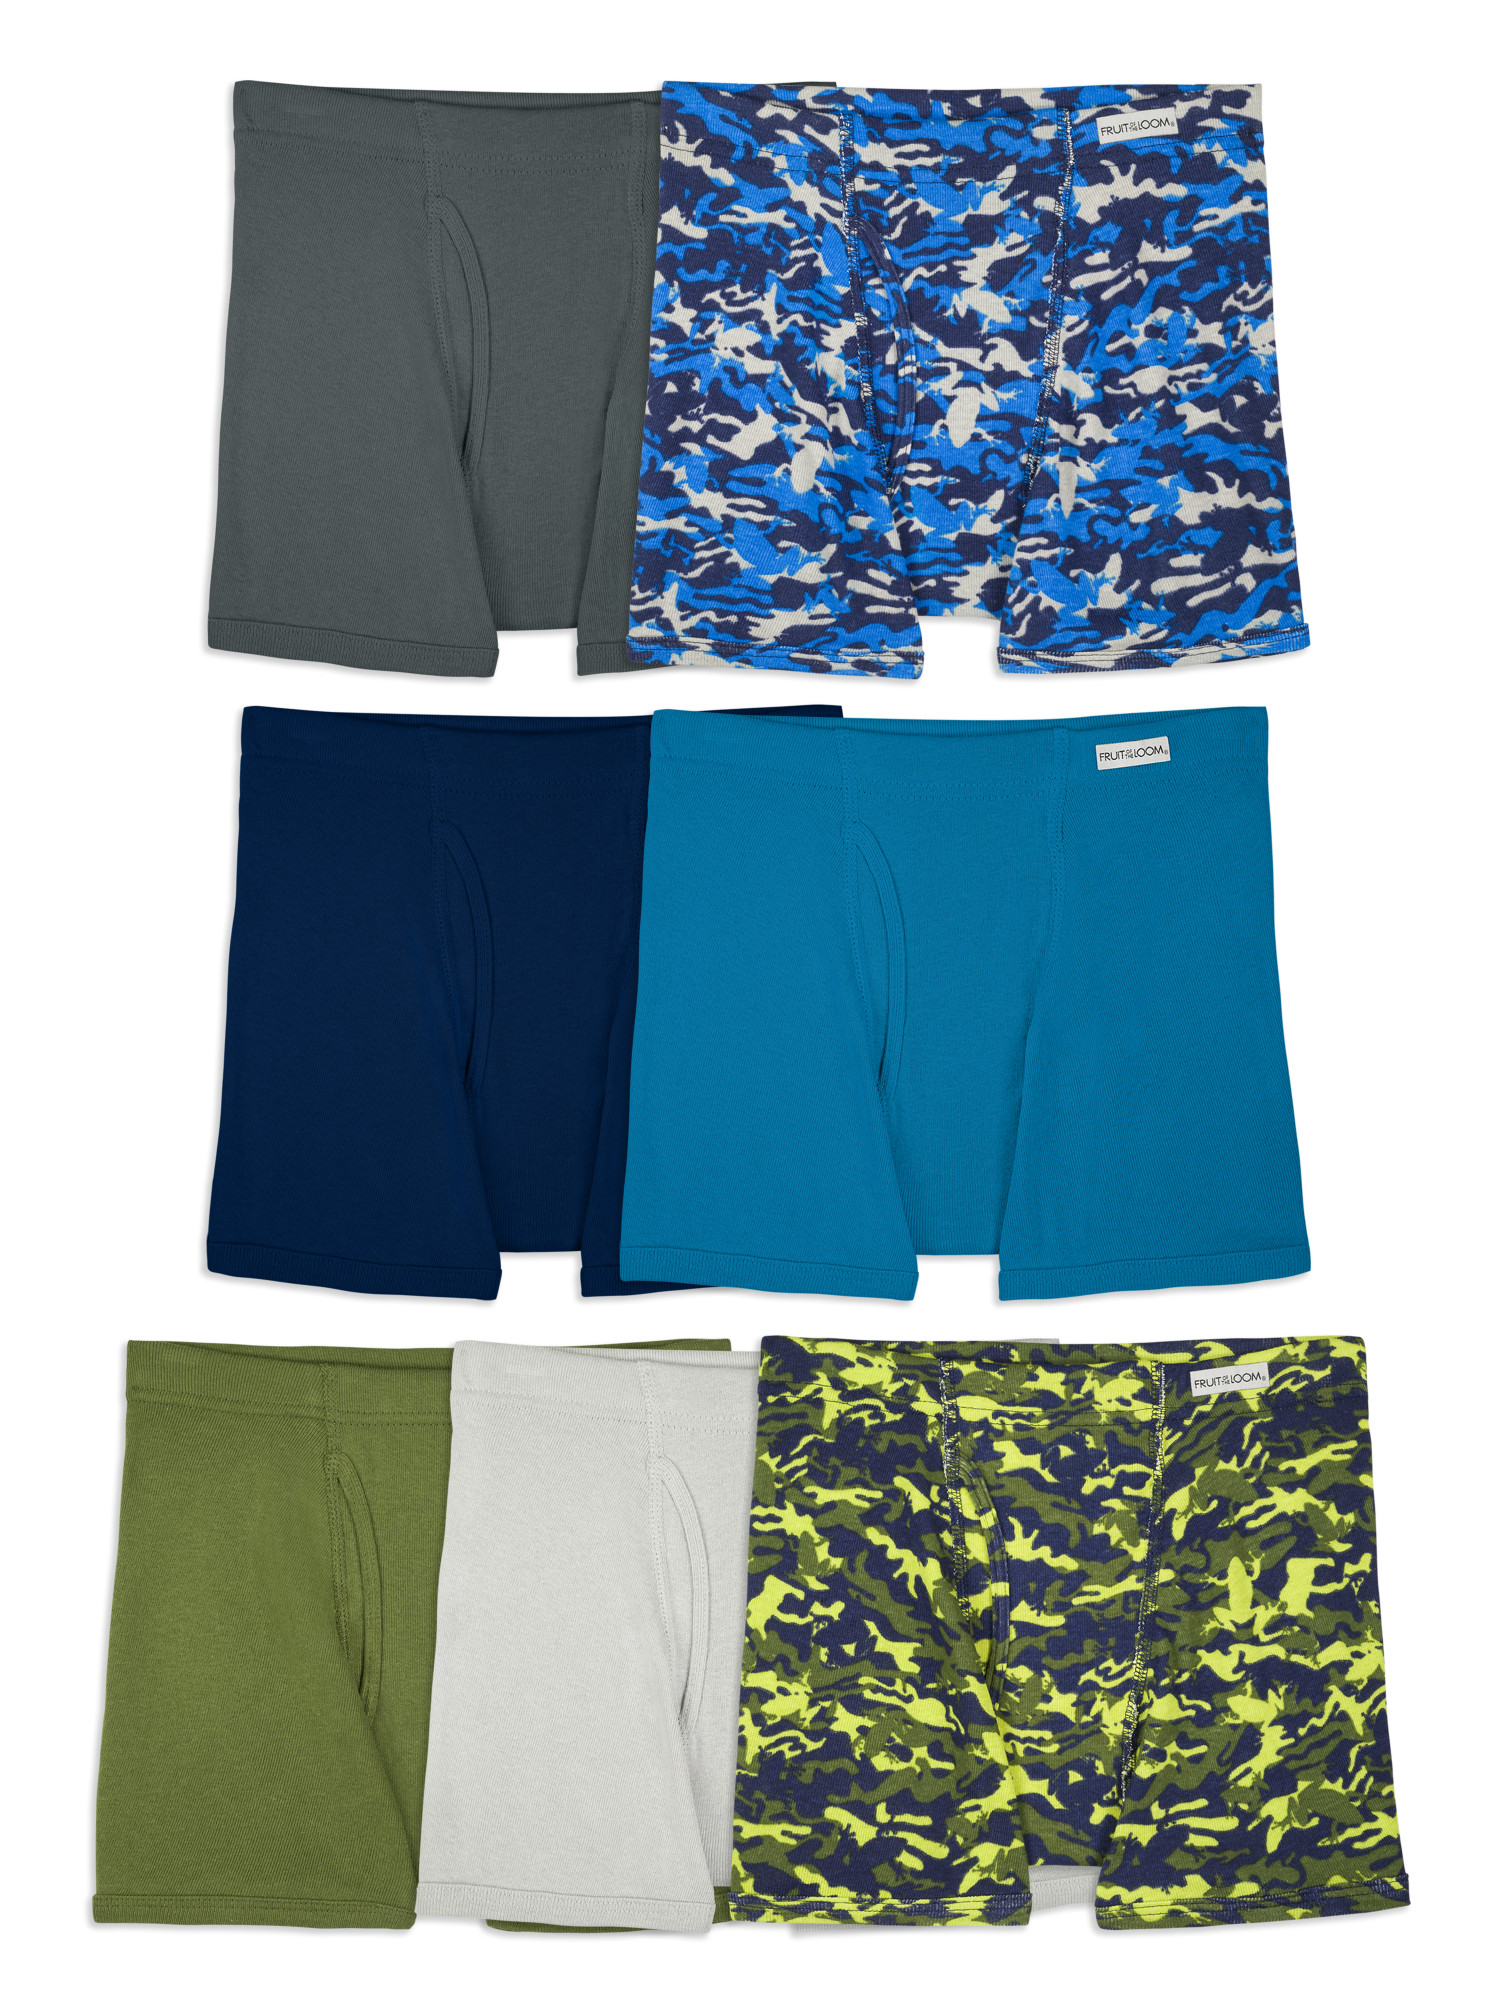 Fruit of the Loom Boys' Cotton Boxer Briefs, 7 Pack - image 1 of 6